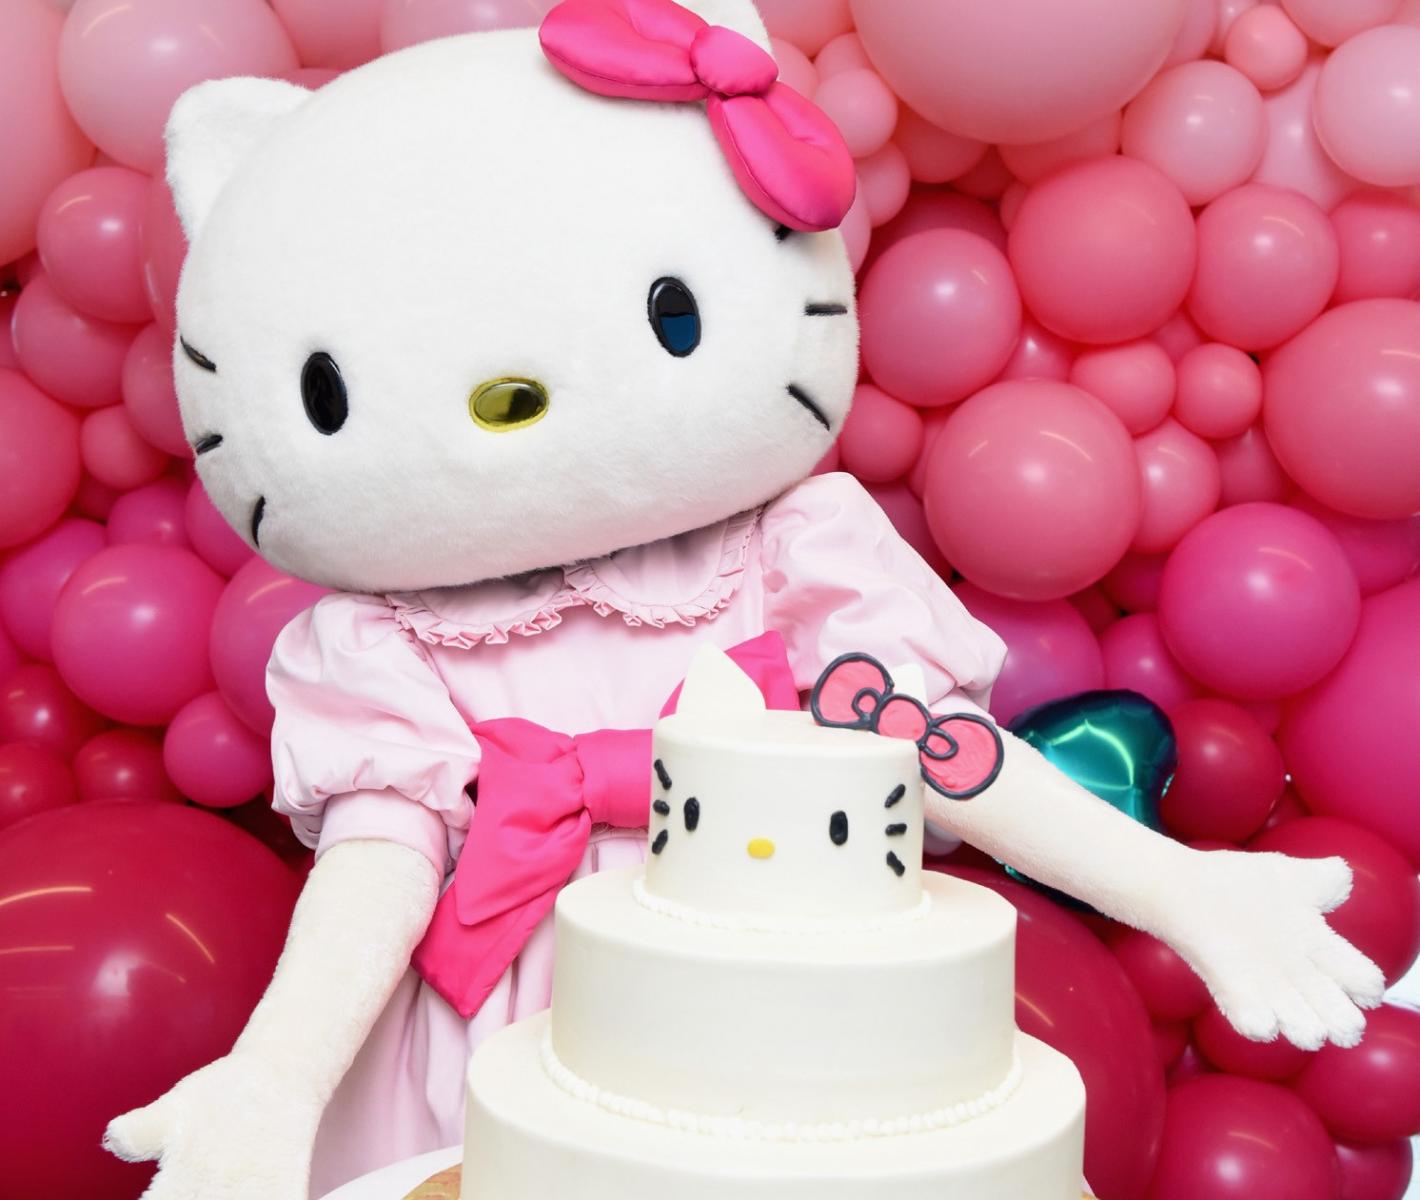 large.1659675170_proactiv_x_hello_kitty_launch_event_-_happy_birthday_to_you121518.jpg